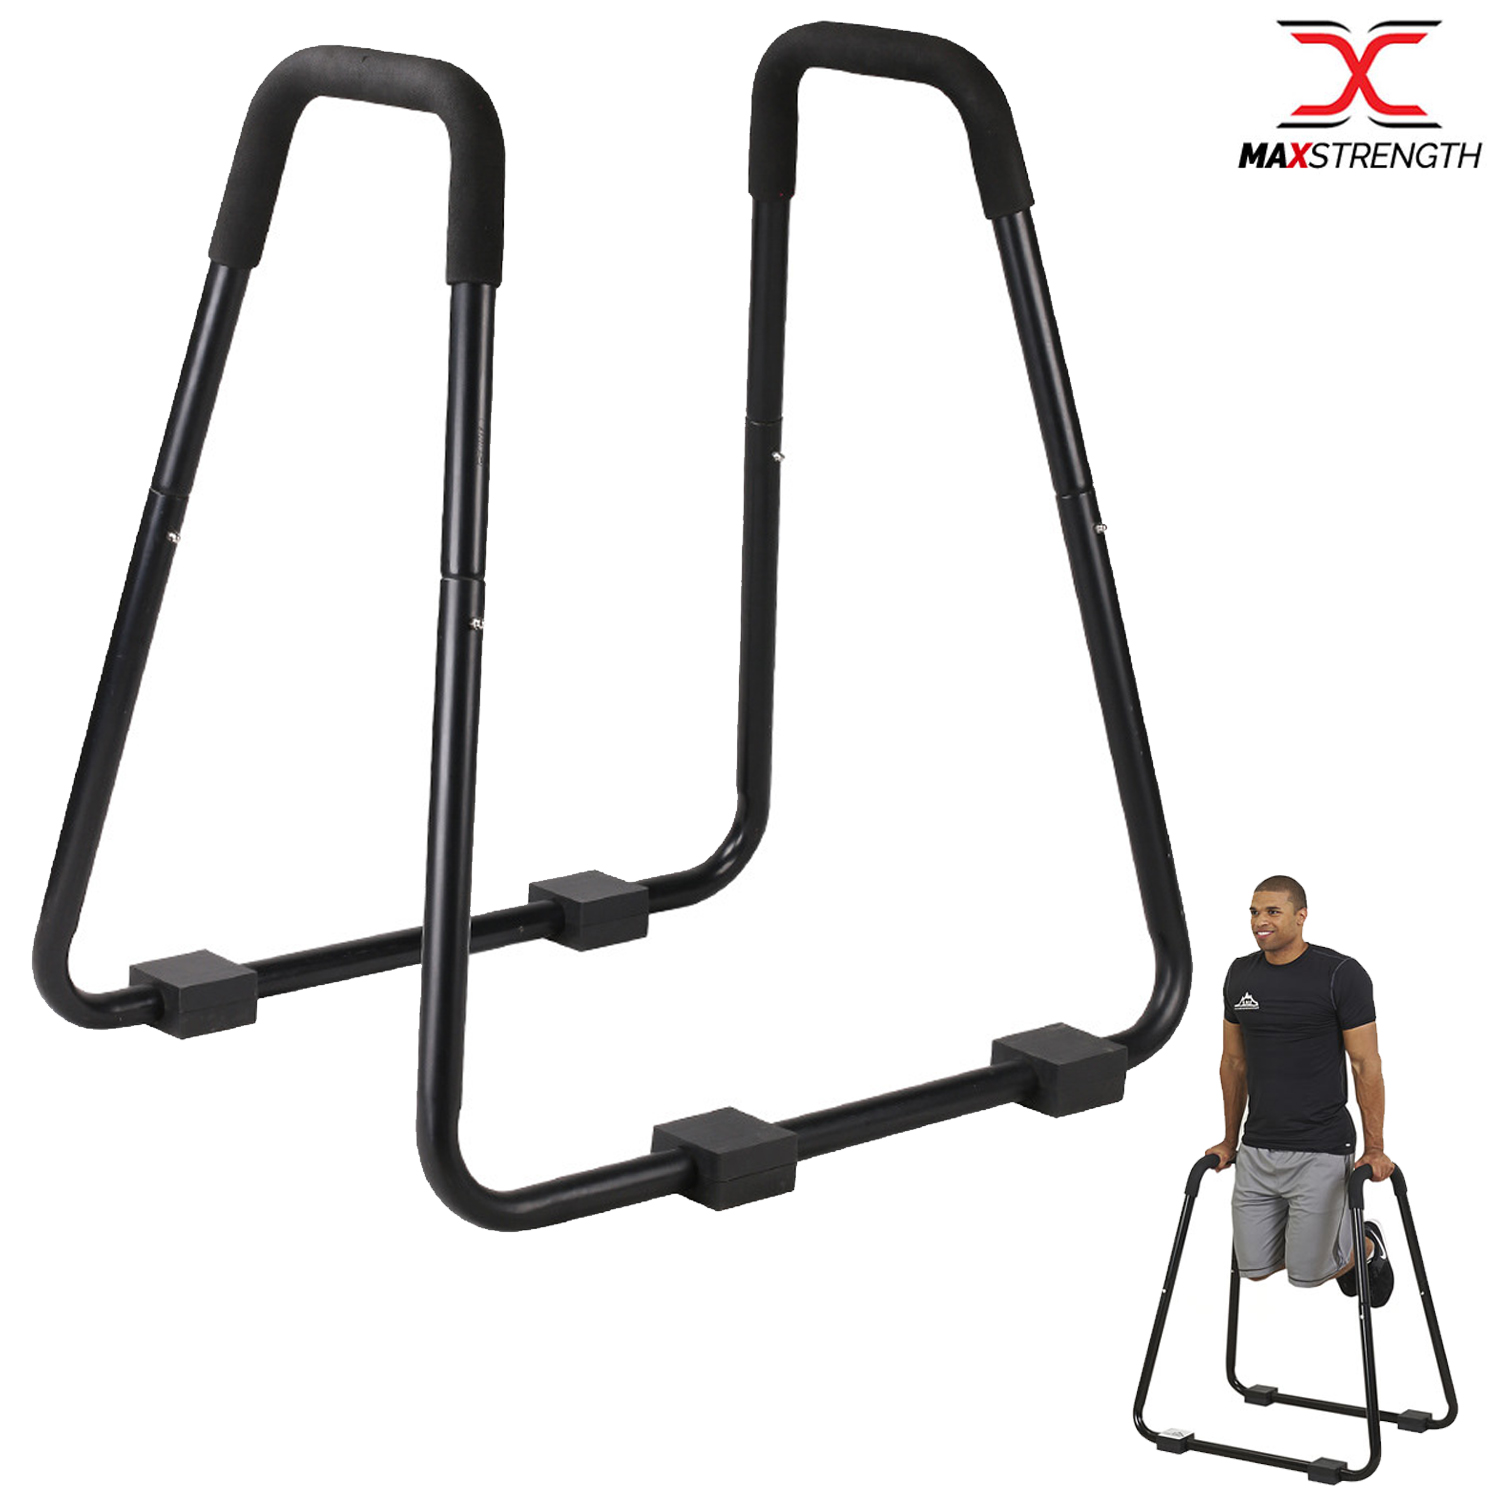 Dip Station Push Up Stand Home Gym Fitness Workout Cross fit Calisthenics Black